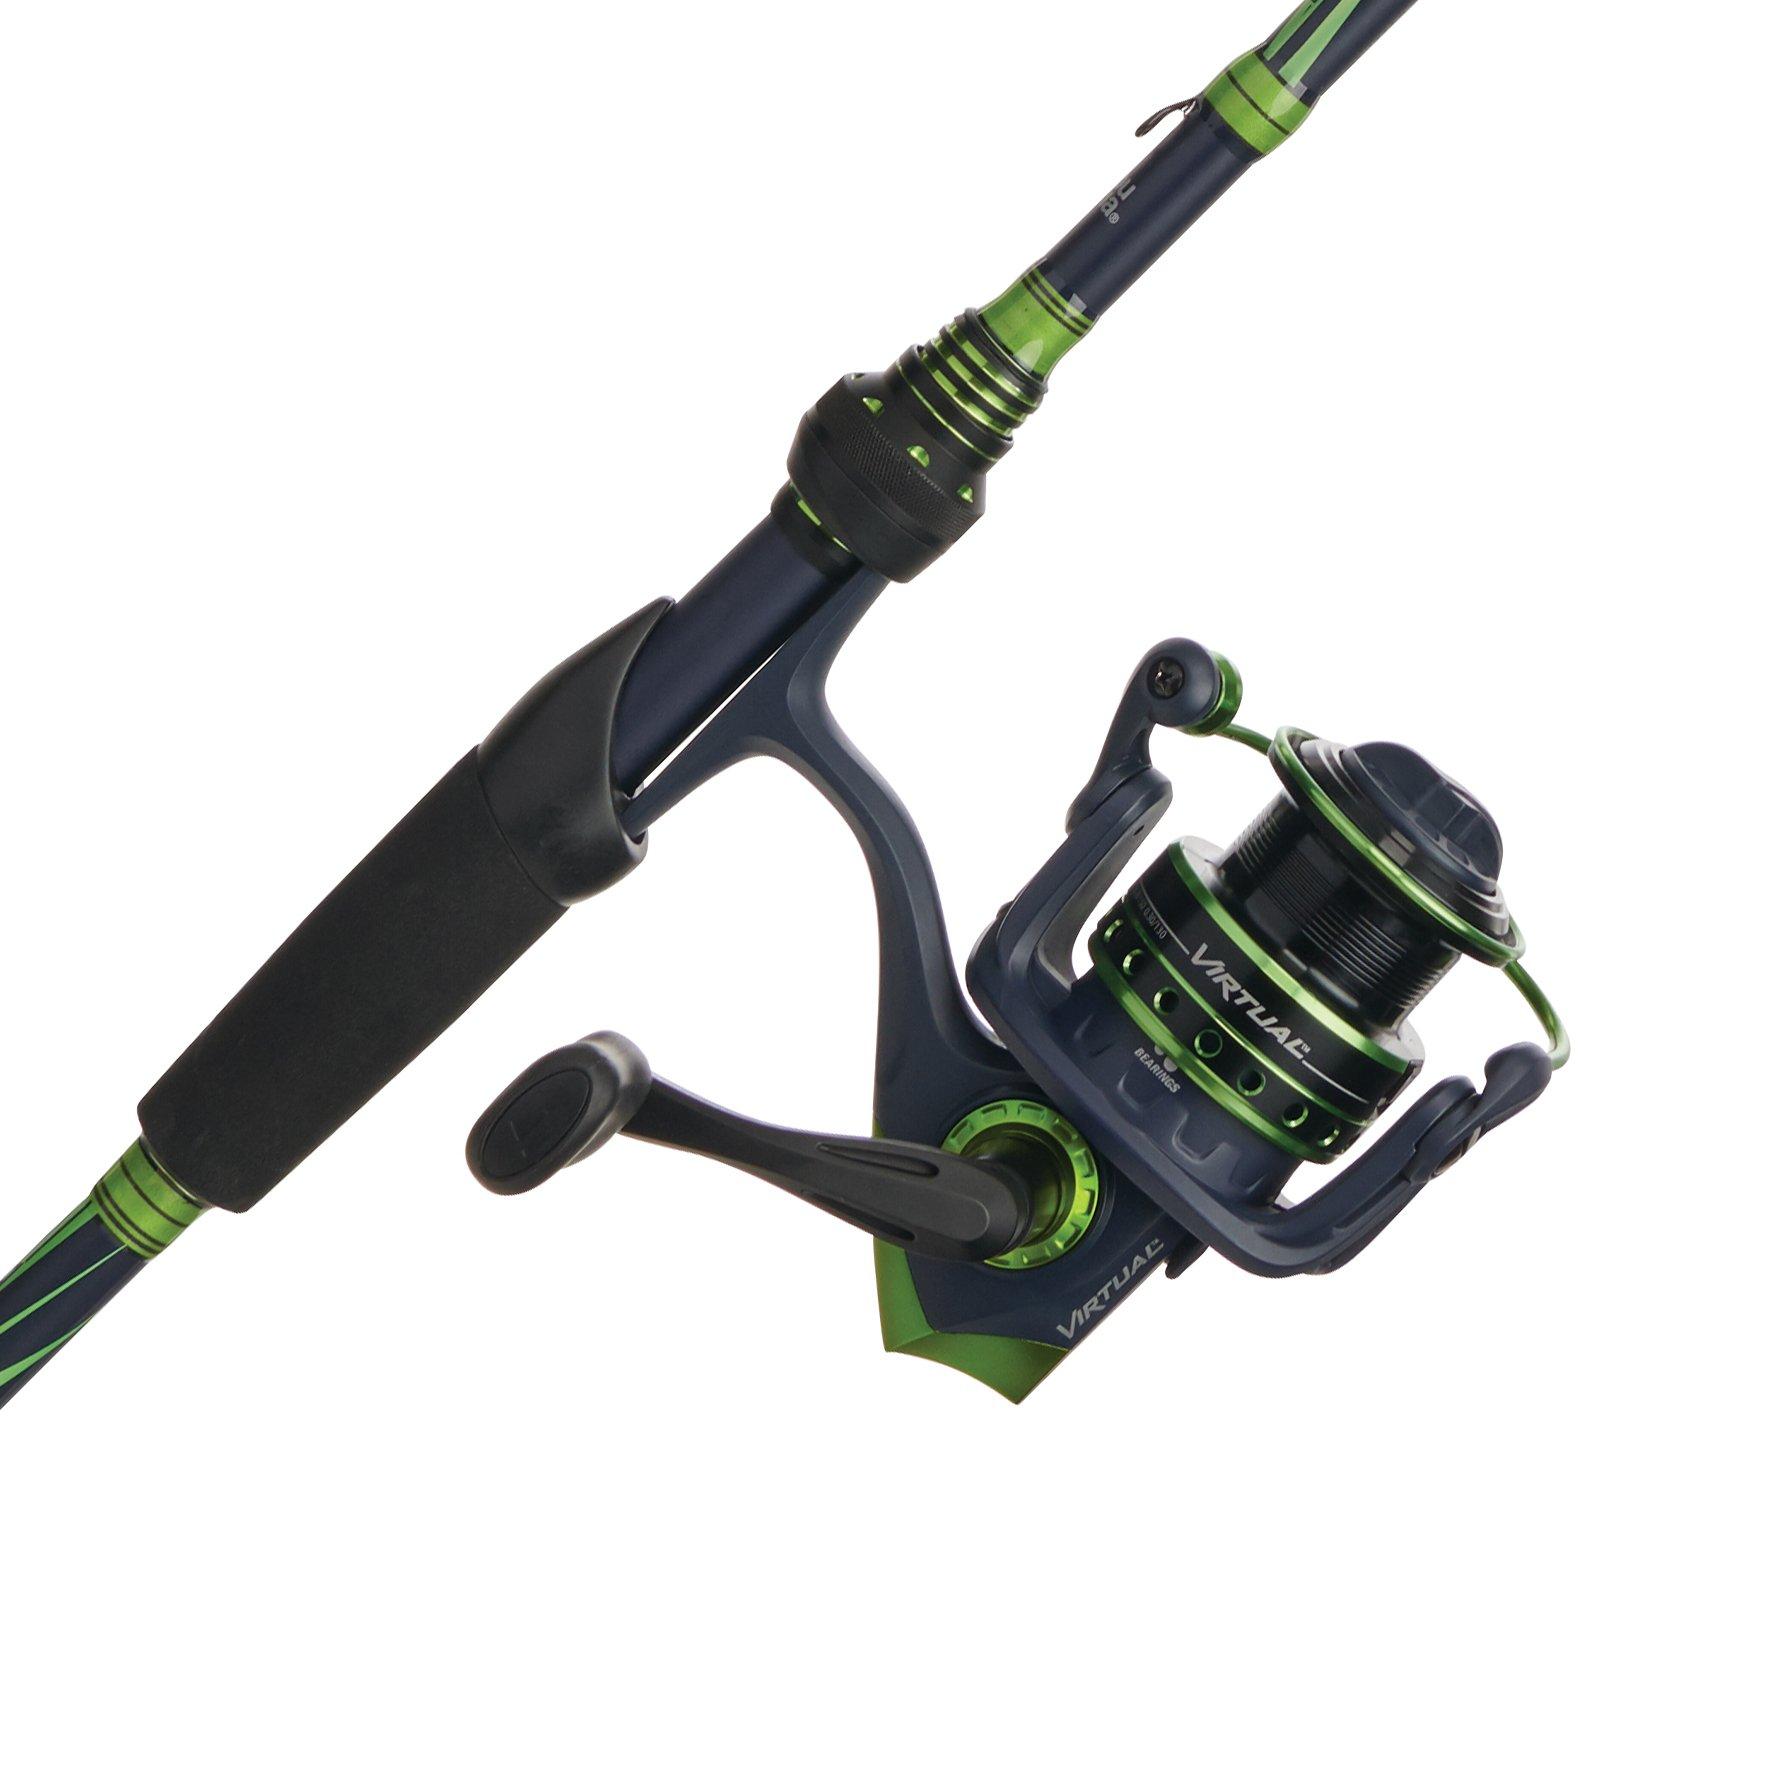 DAM Vibe Combo 6ft Rod and Reel inc Line, From £24.99